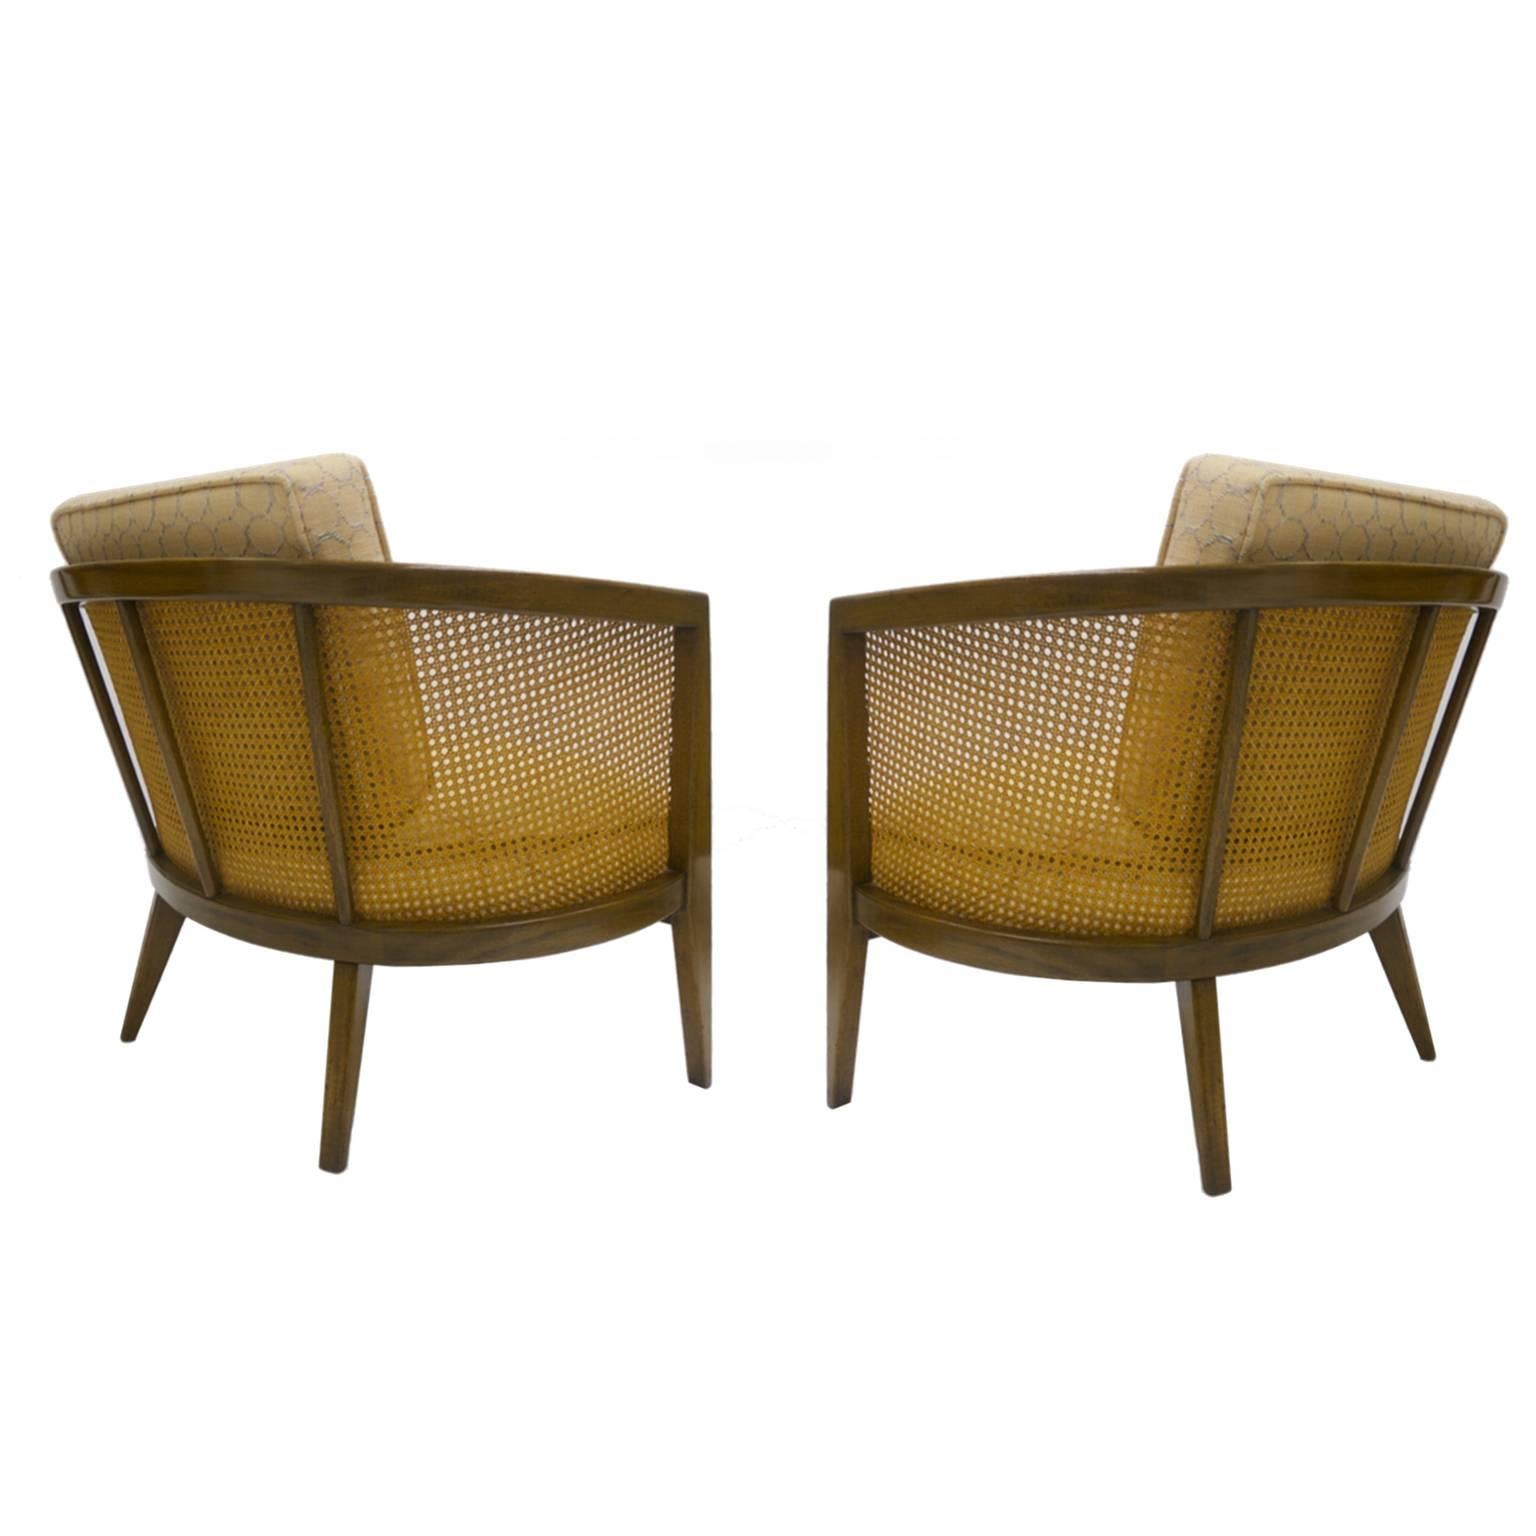 20th Century Rare Pair of Harvey Probber Cane Barrel Back Lounge Chairs Excellent Condition